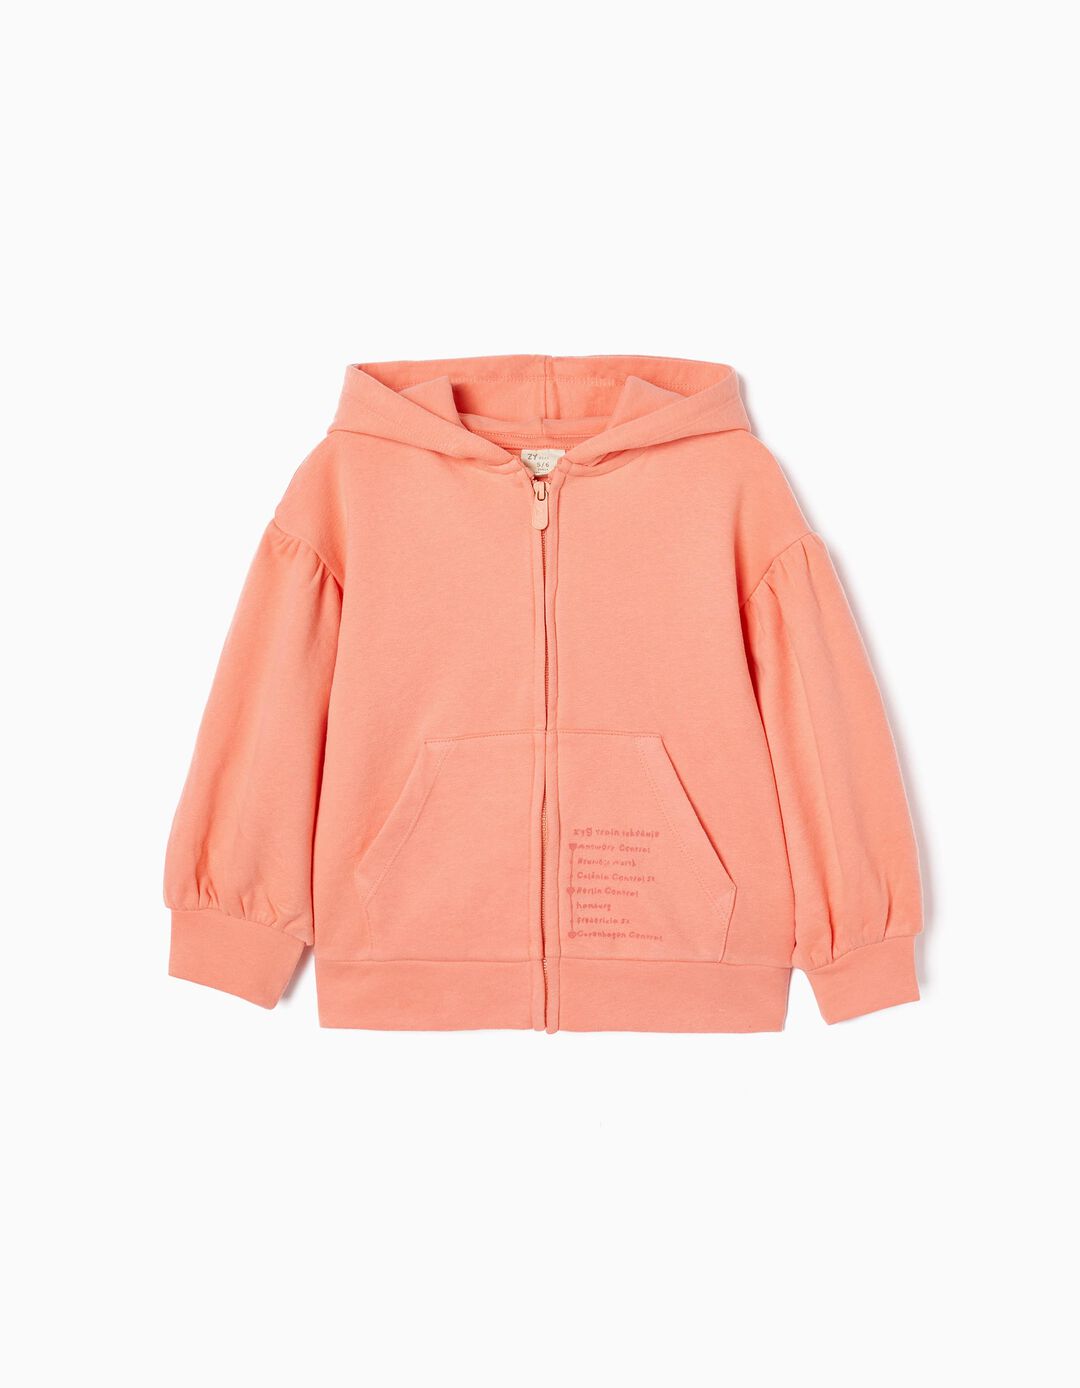 Cotton Hooded Jacket for Girls 'City Break', Coral